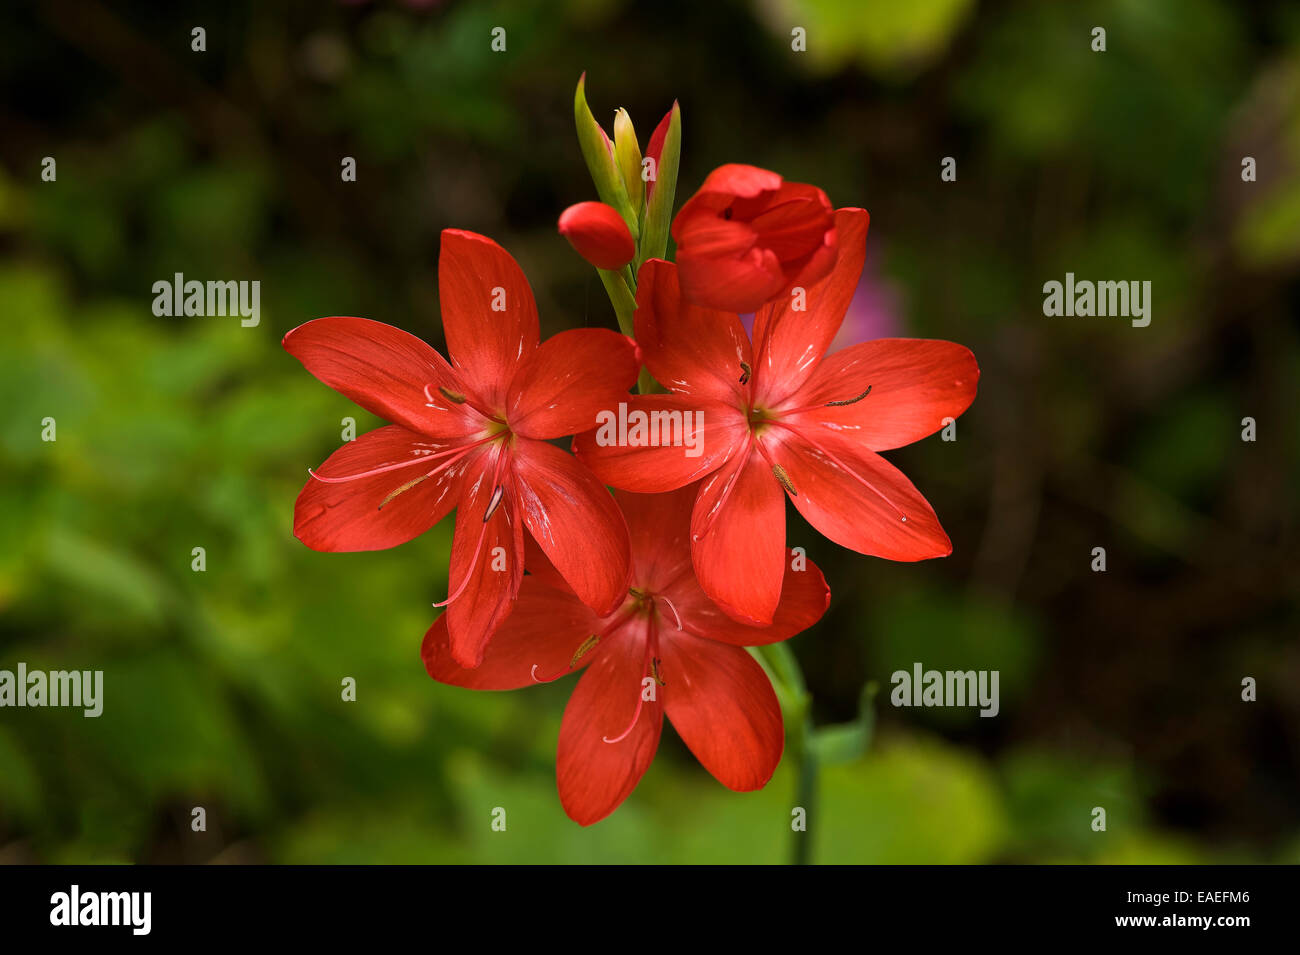 red flower headCluster of red kaffir lily flowers Stock Photo